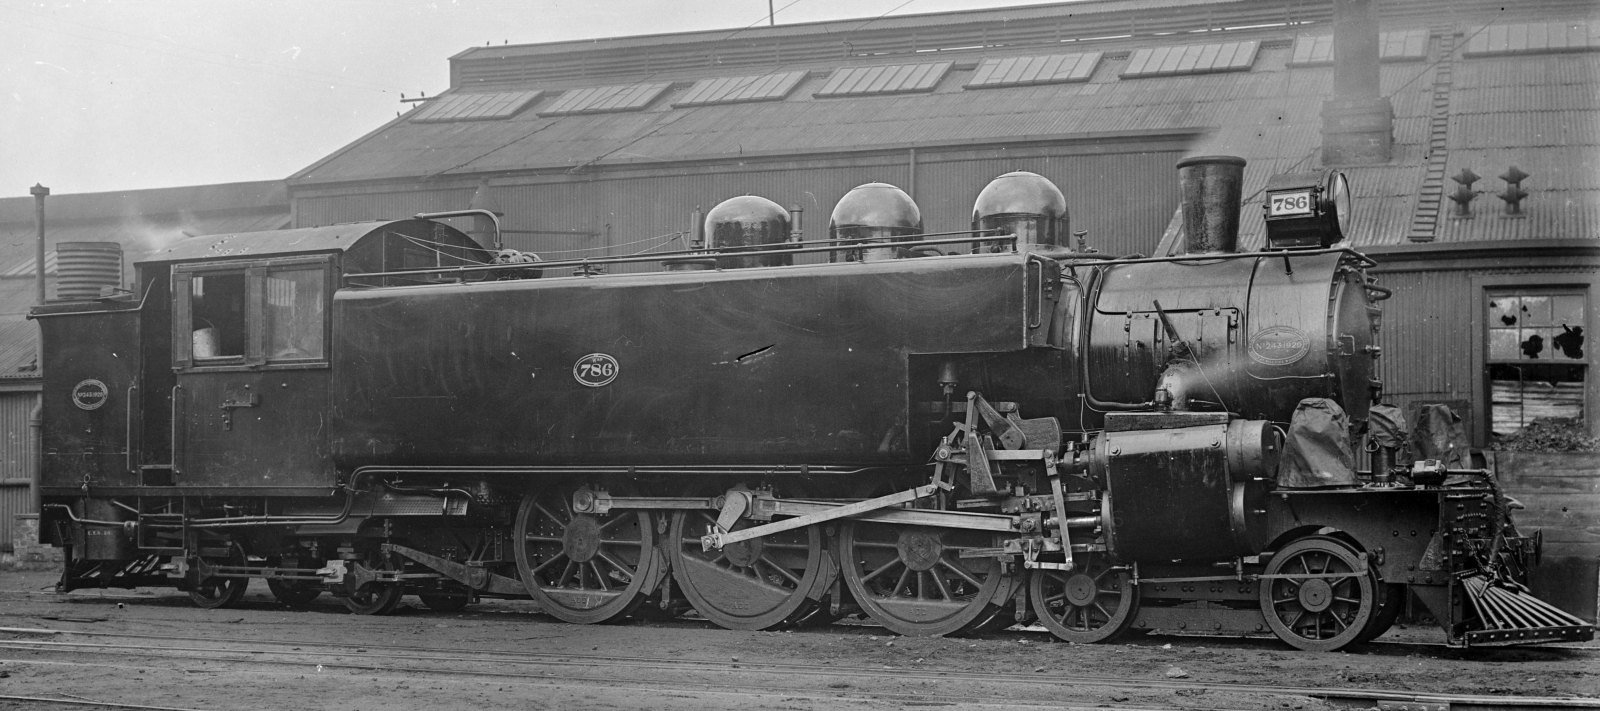 W<sup>AB</sup> 786 in July 1926 at Hillside